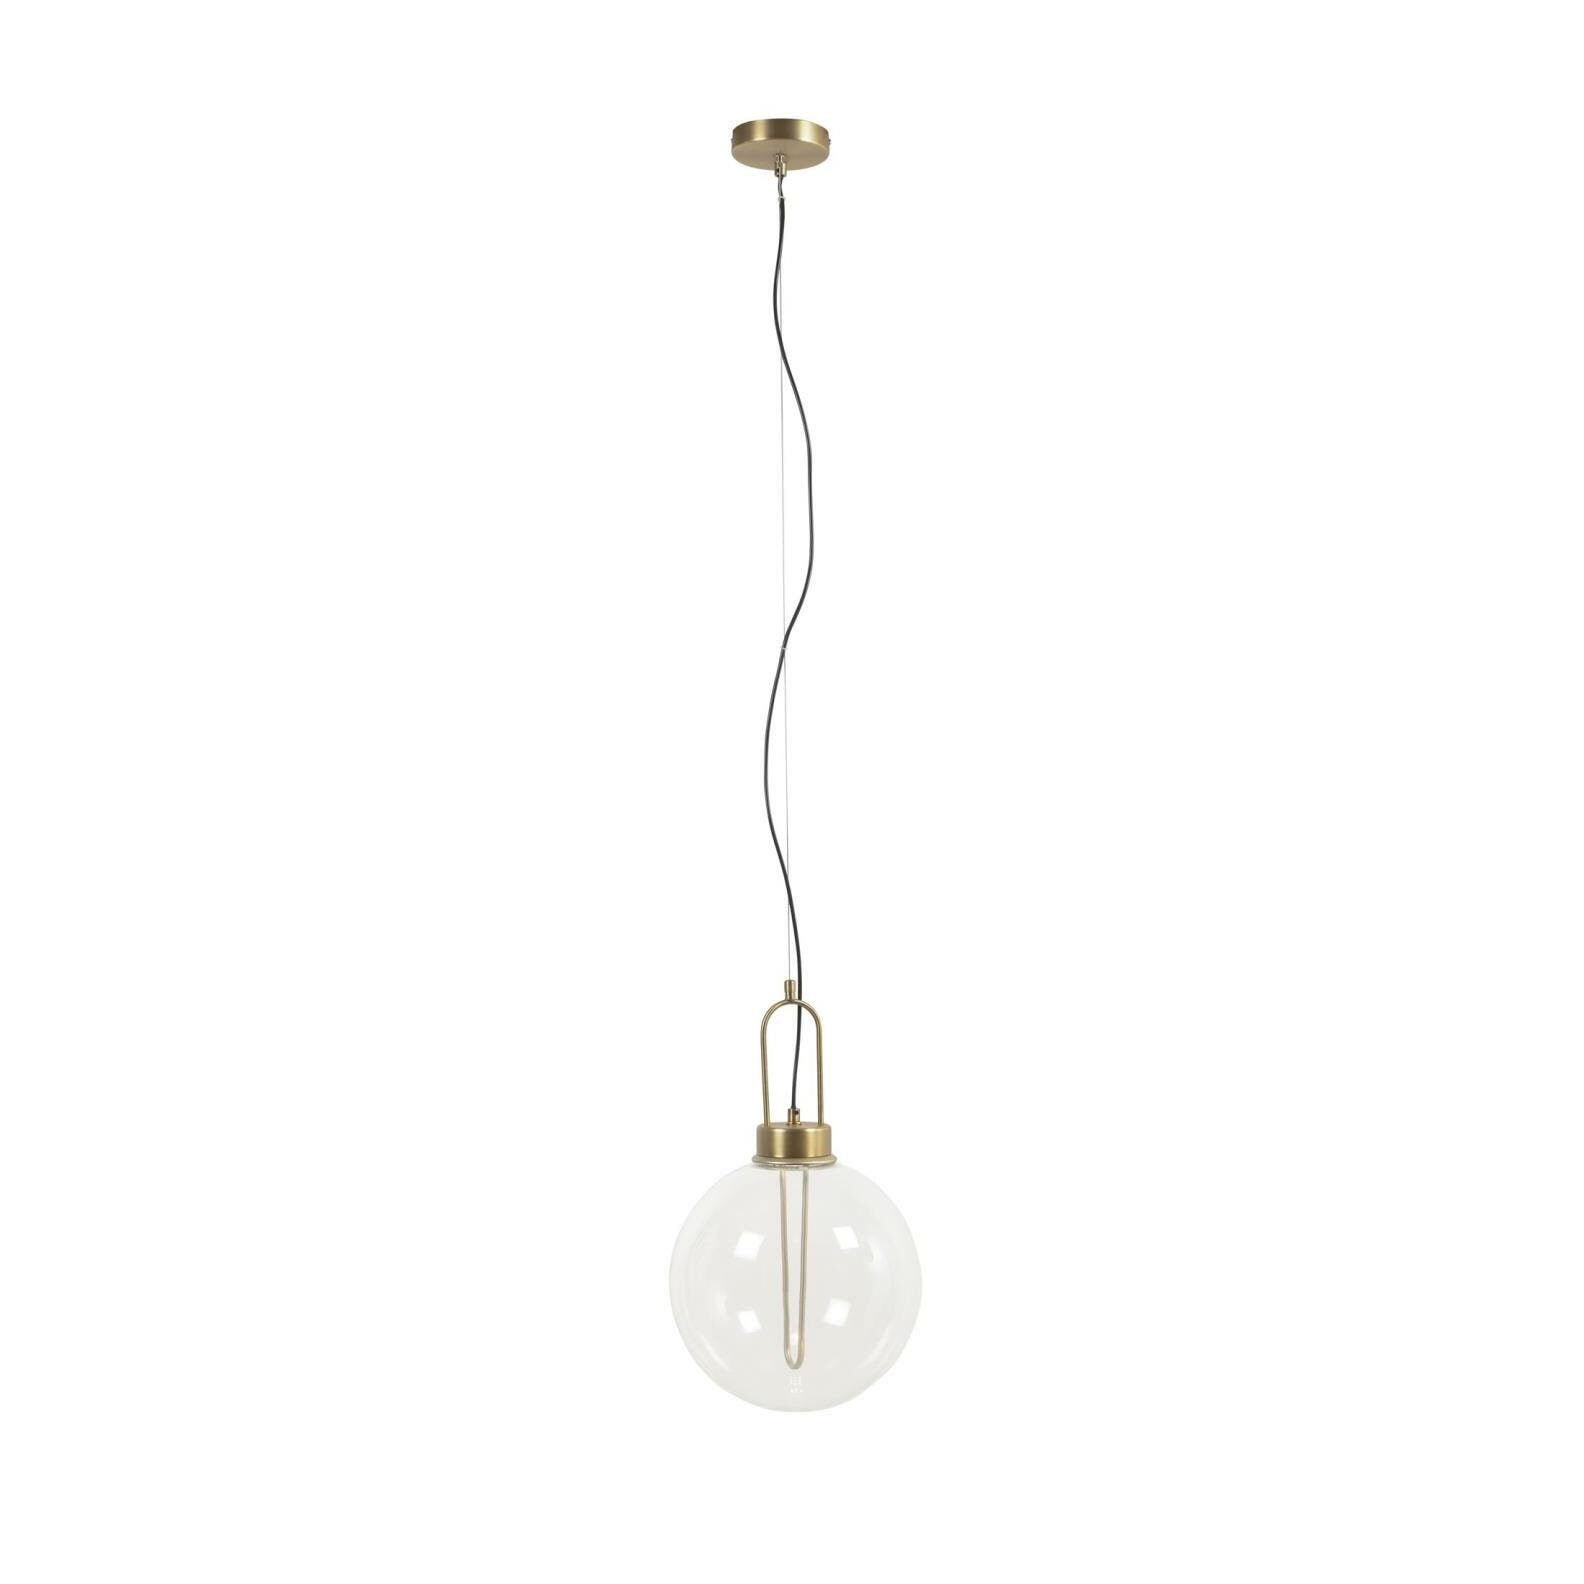 Kave Home Hanglamp Edelweiss Goud